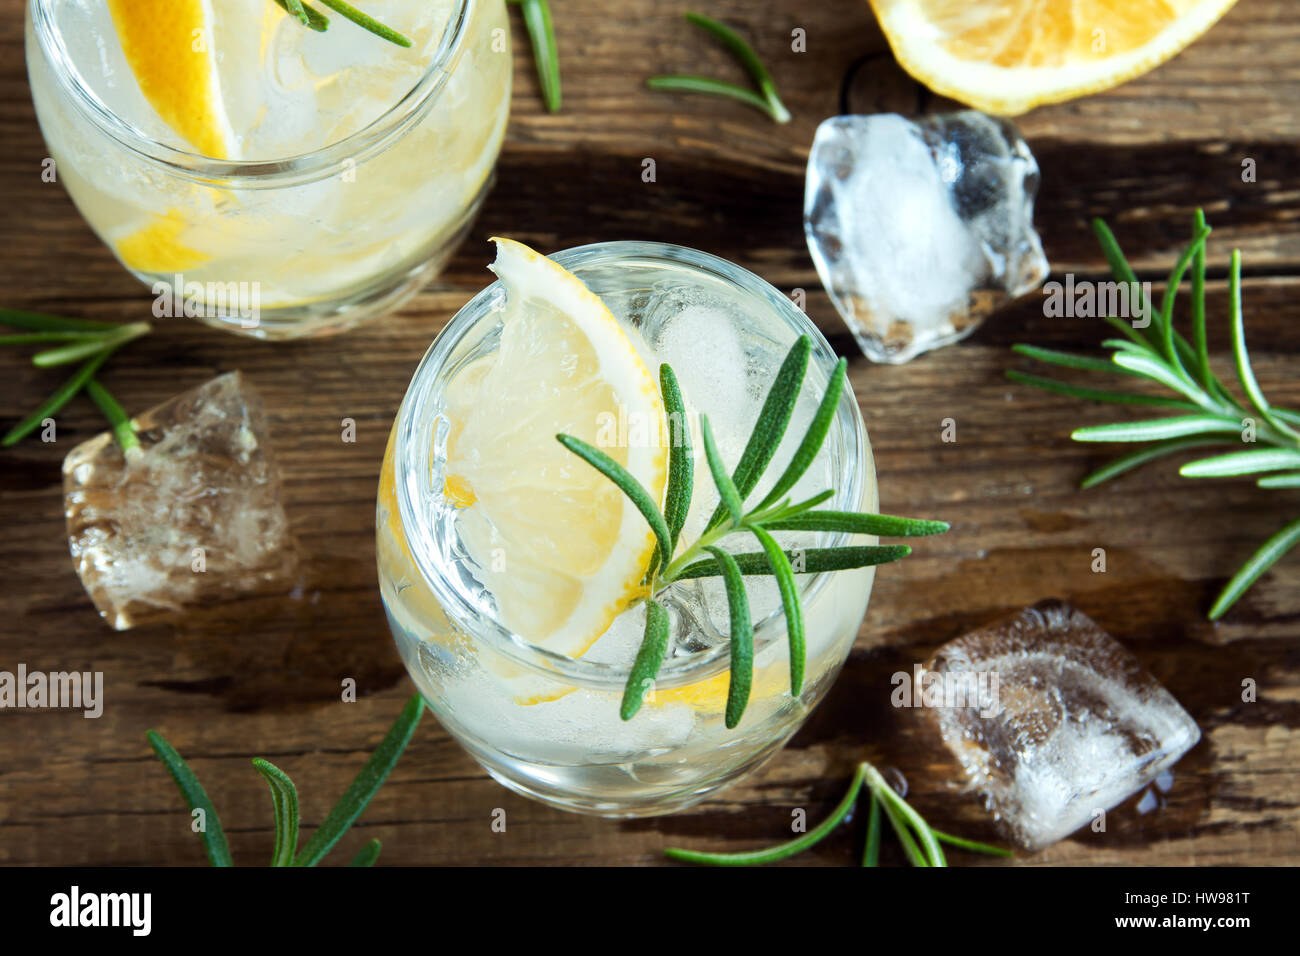 Alcoholic drink (gin tonic cocktail) with lemon, rosemary and ice on rustic wooden table, copy space Stock Photo